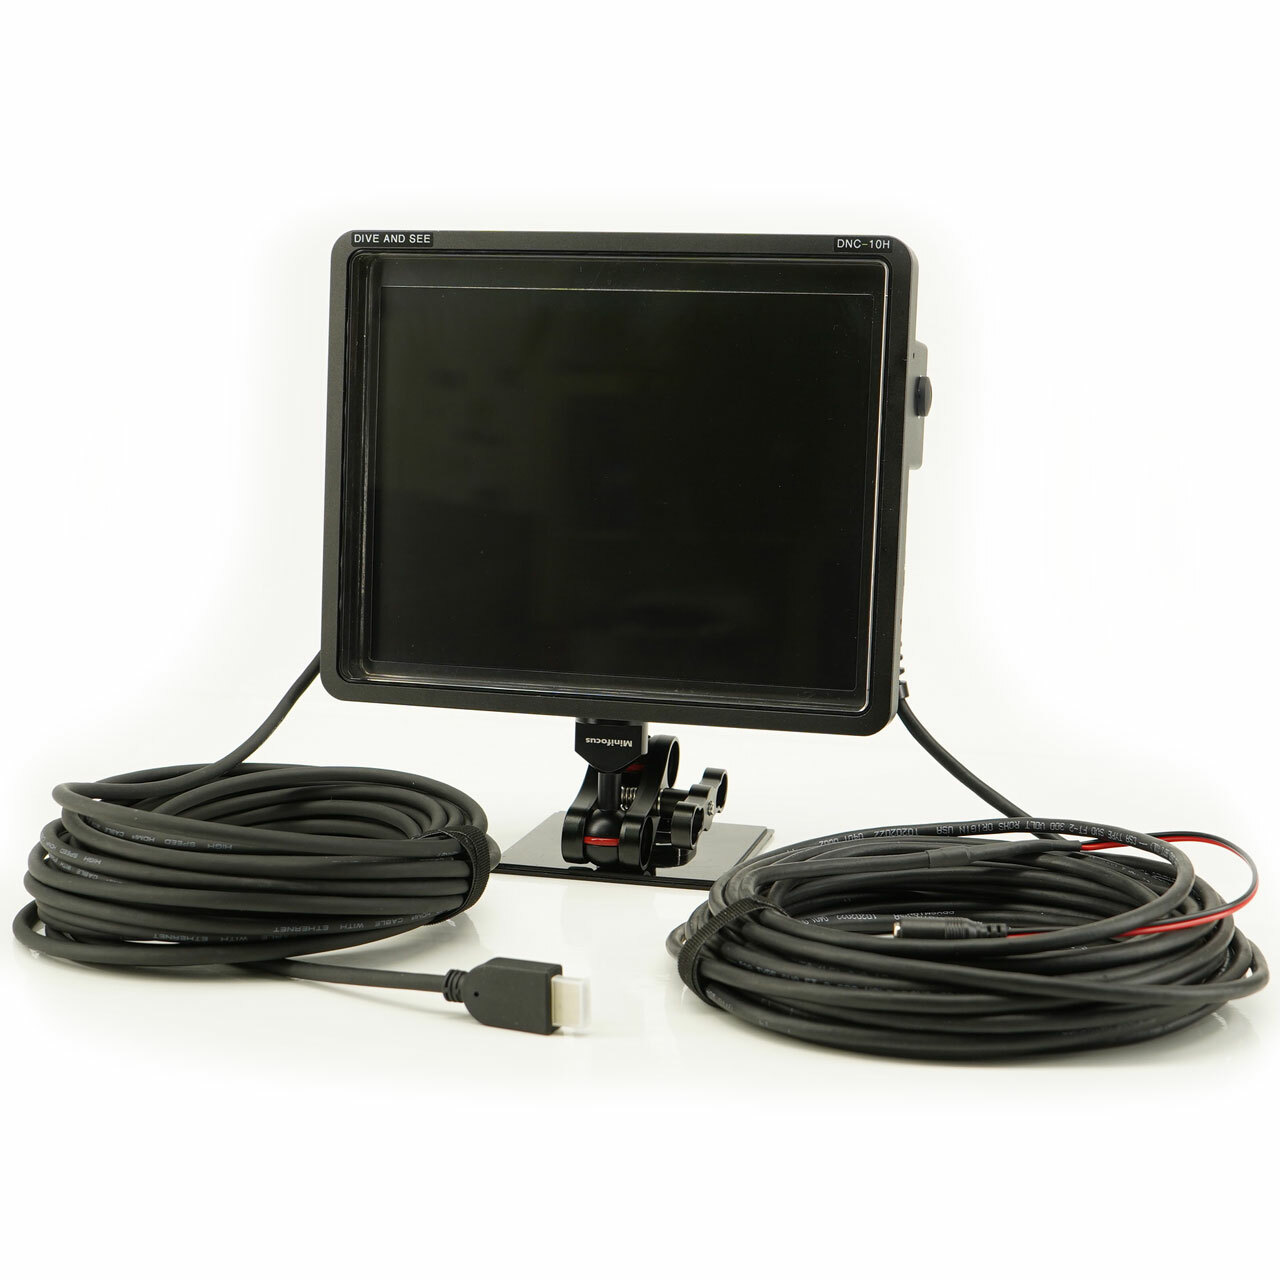 underwater monitor for Marine and Military Use